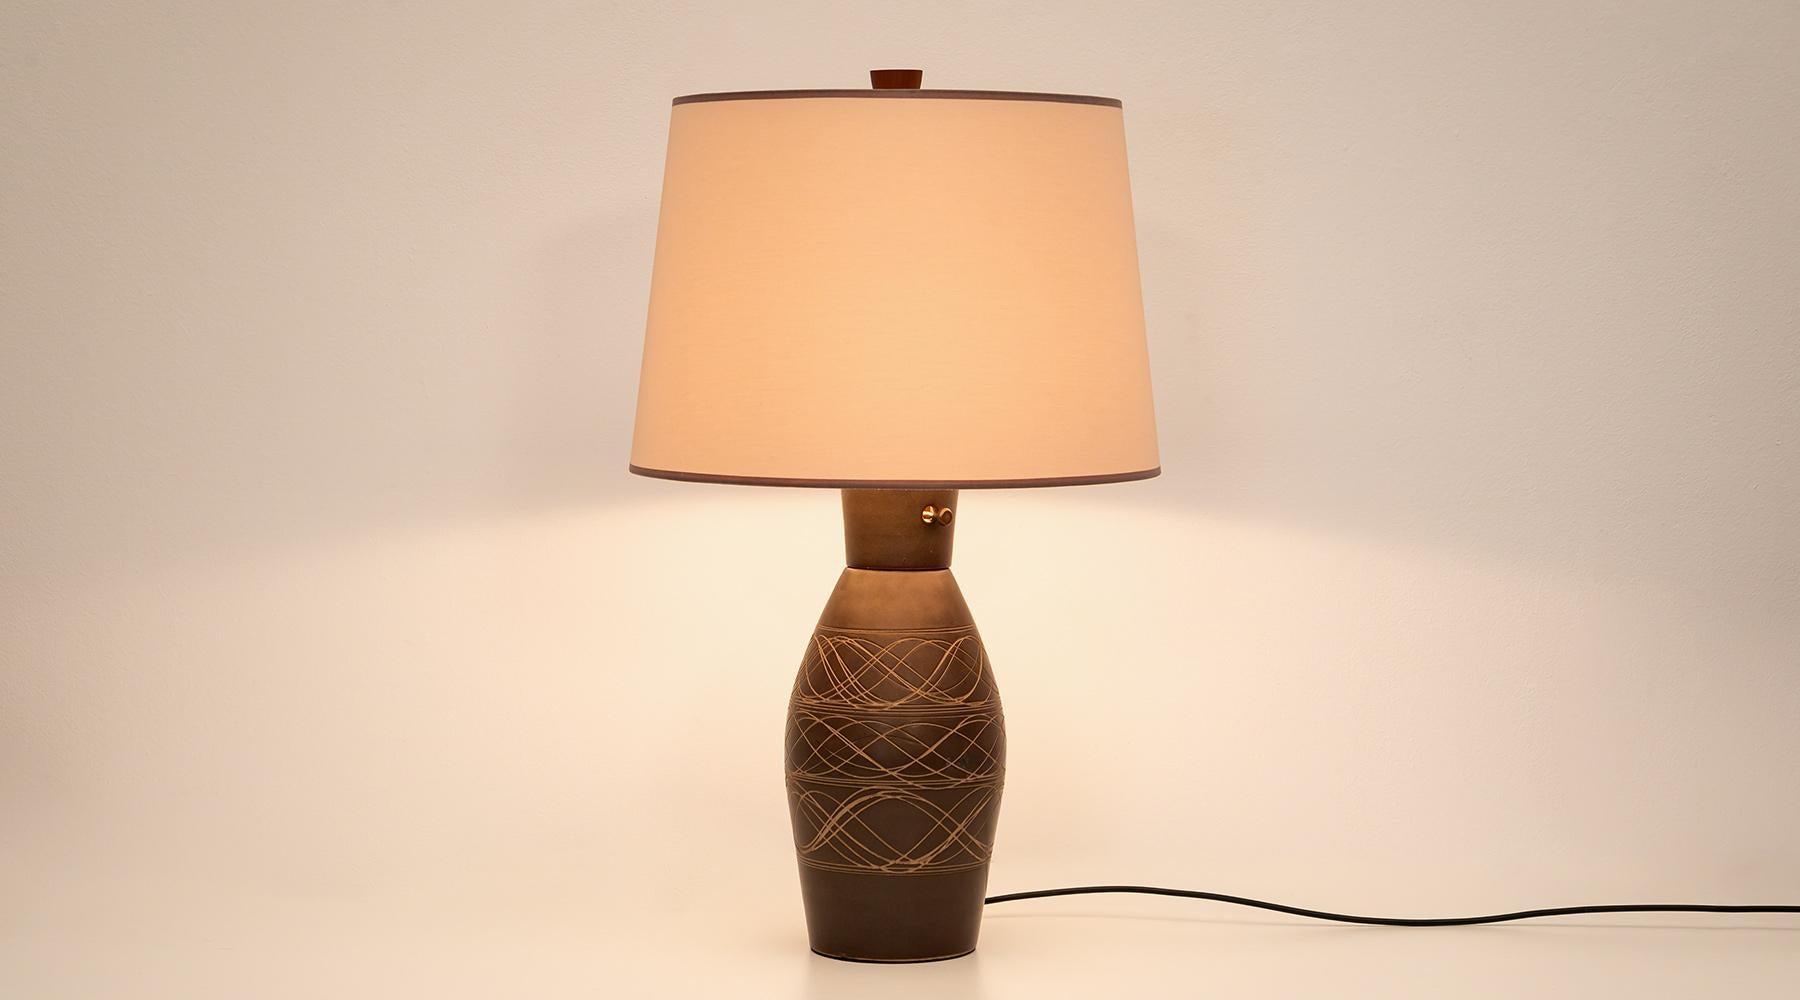 Table lamp, warm brown ceramic, light shadow, Jane and Gordon Martz, USA, 1954

Stunningly simple, attractive ceramic table lamp by the designers Jane & Gordon Matz. The lamp is in excellent condition. The ceramic comes in dark brown body and is